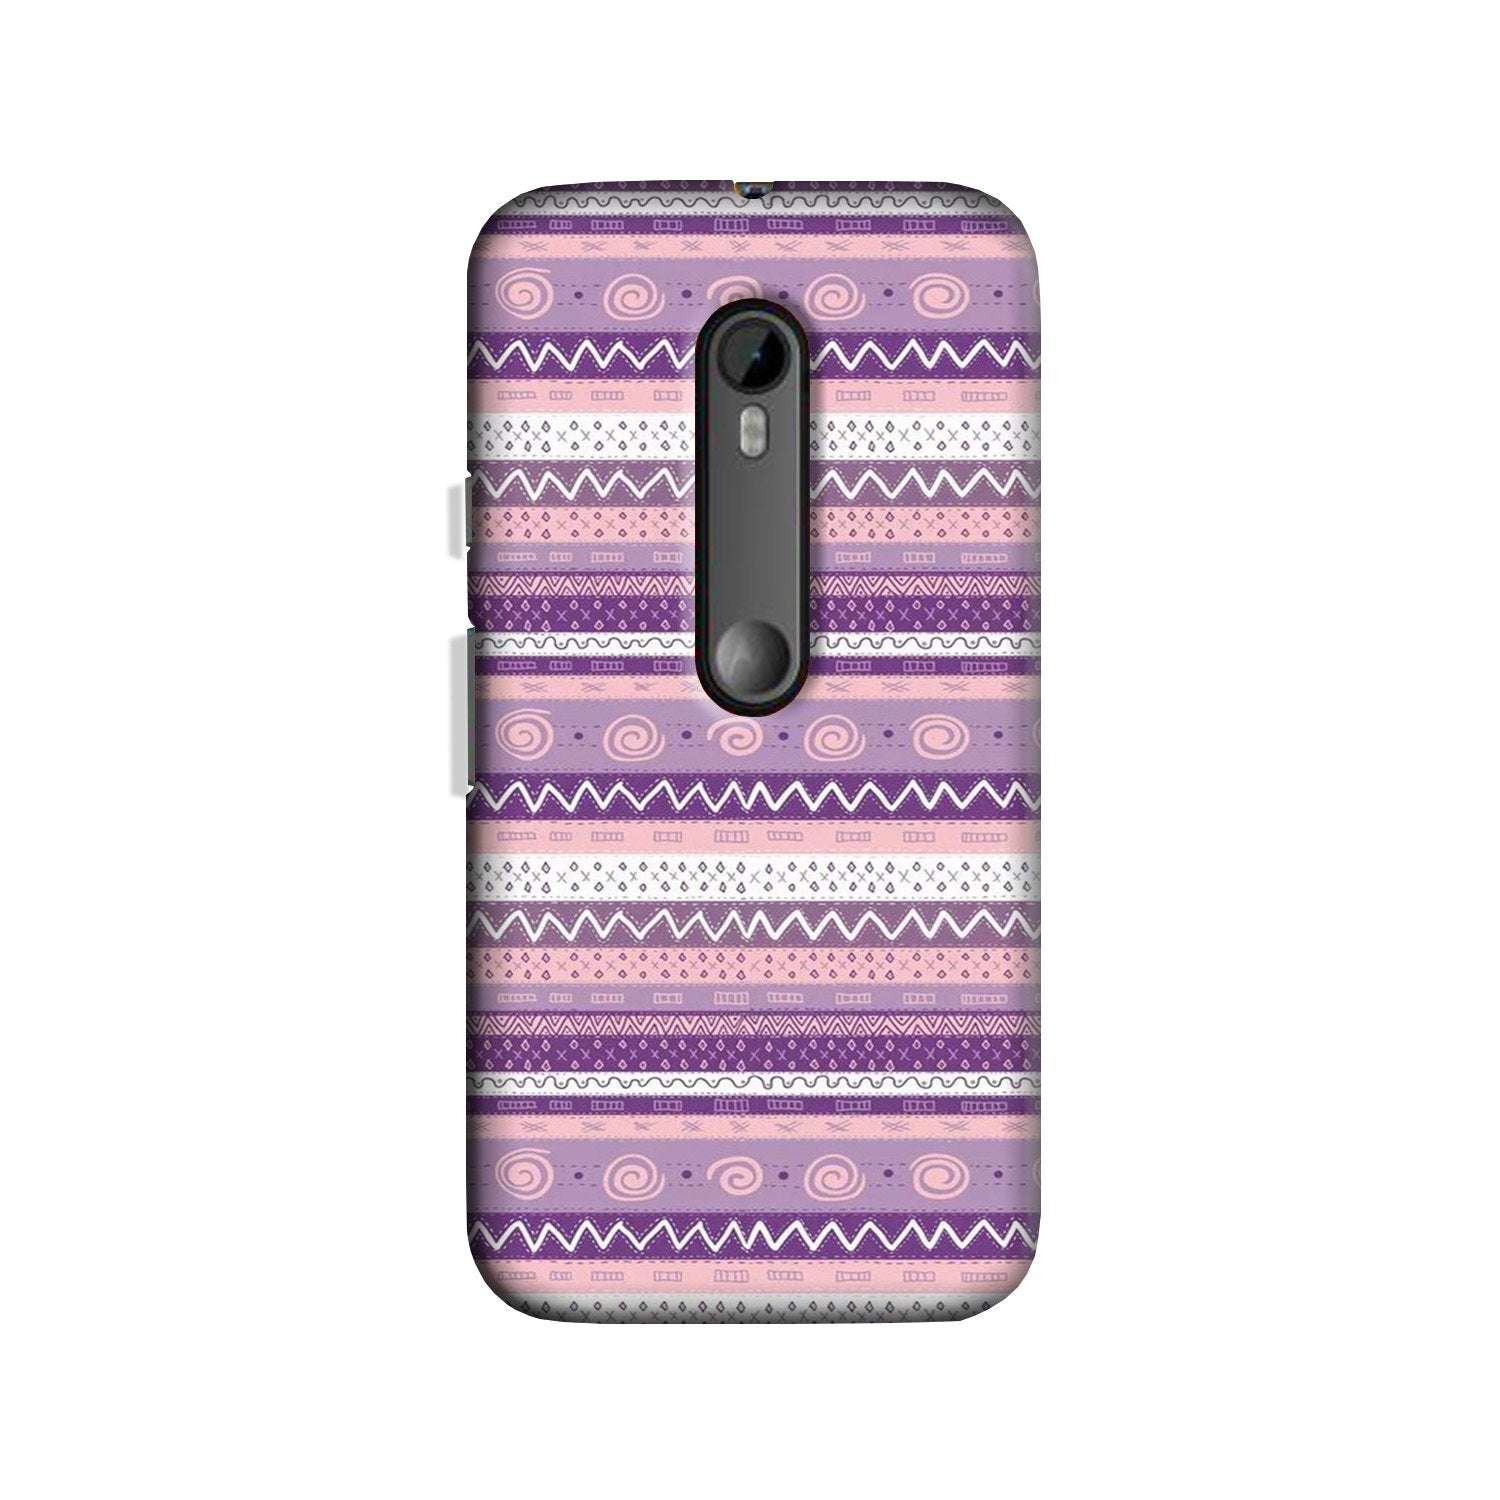 Zigzag line pattern3 Case for Moto X Force